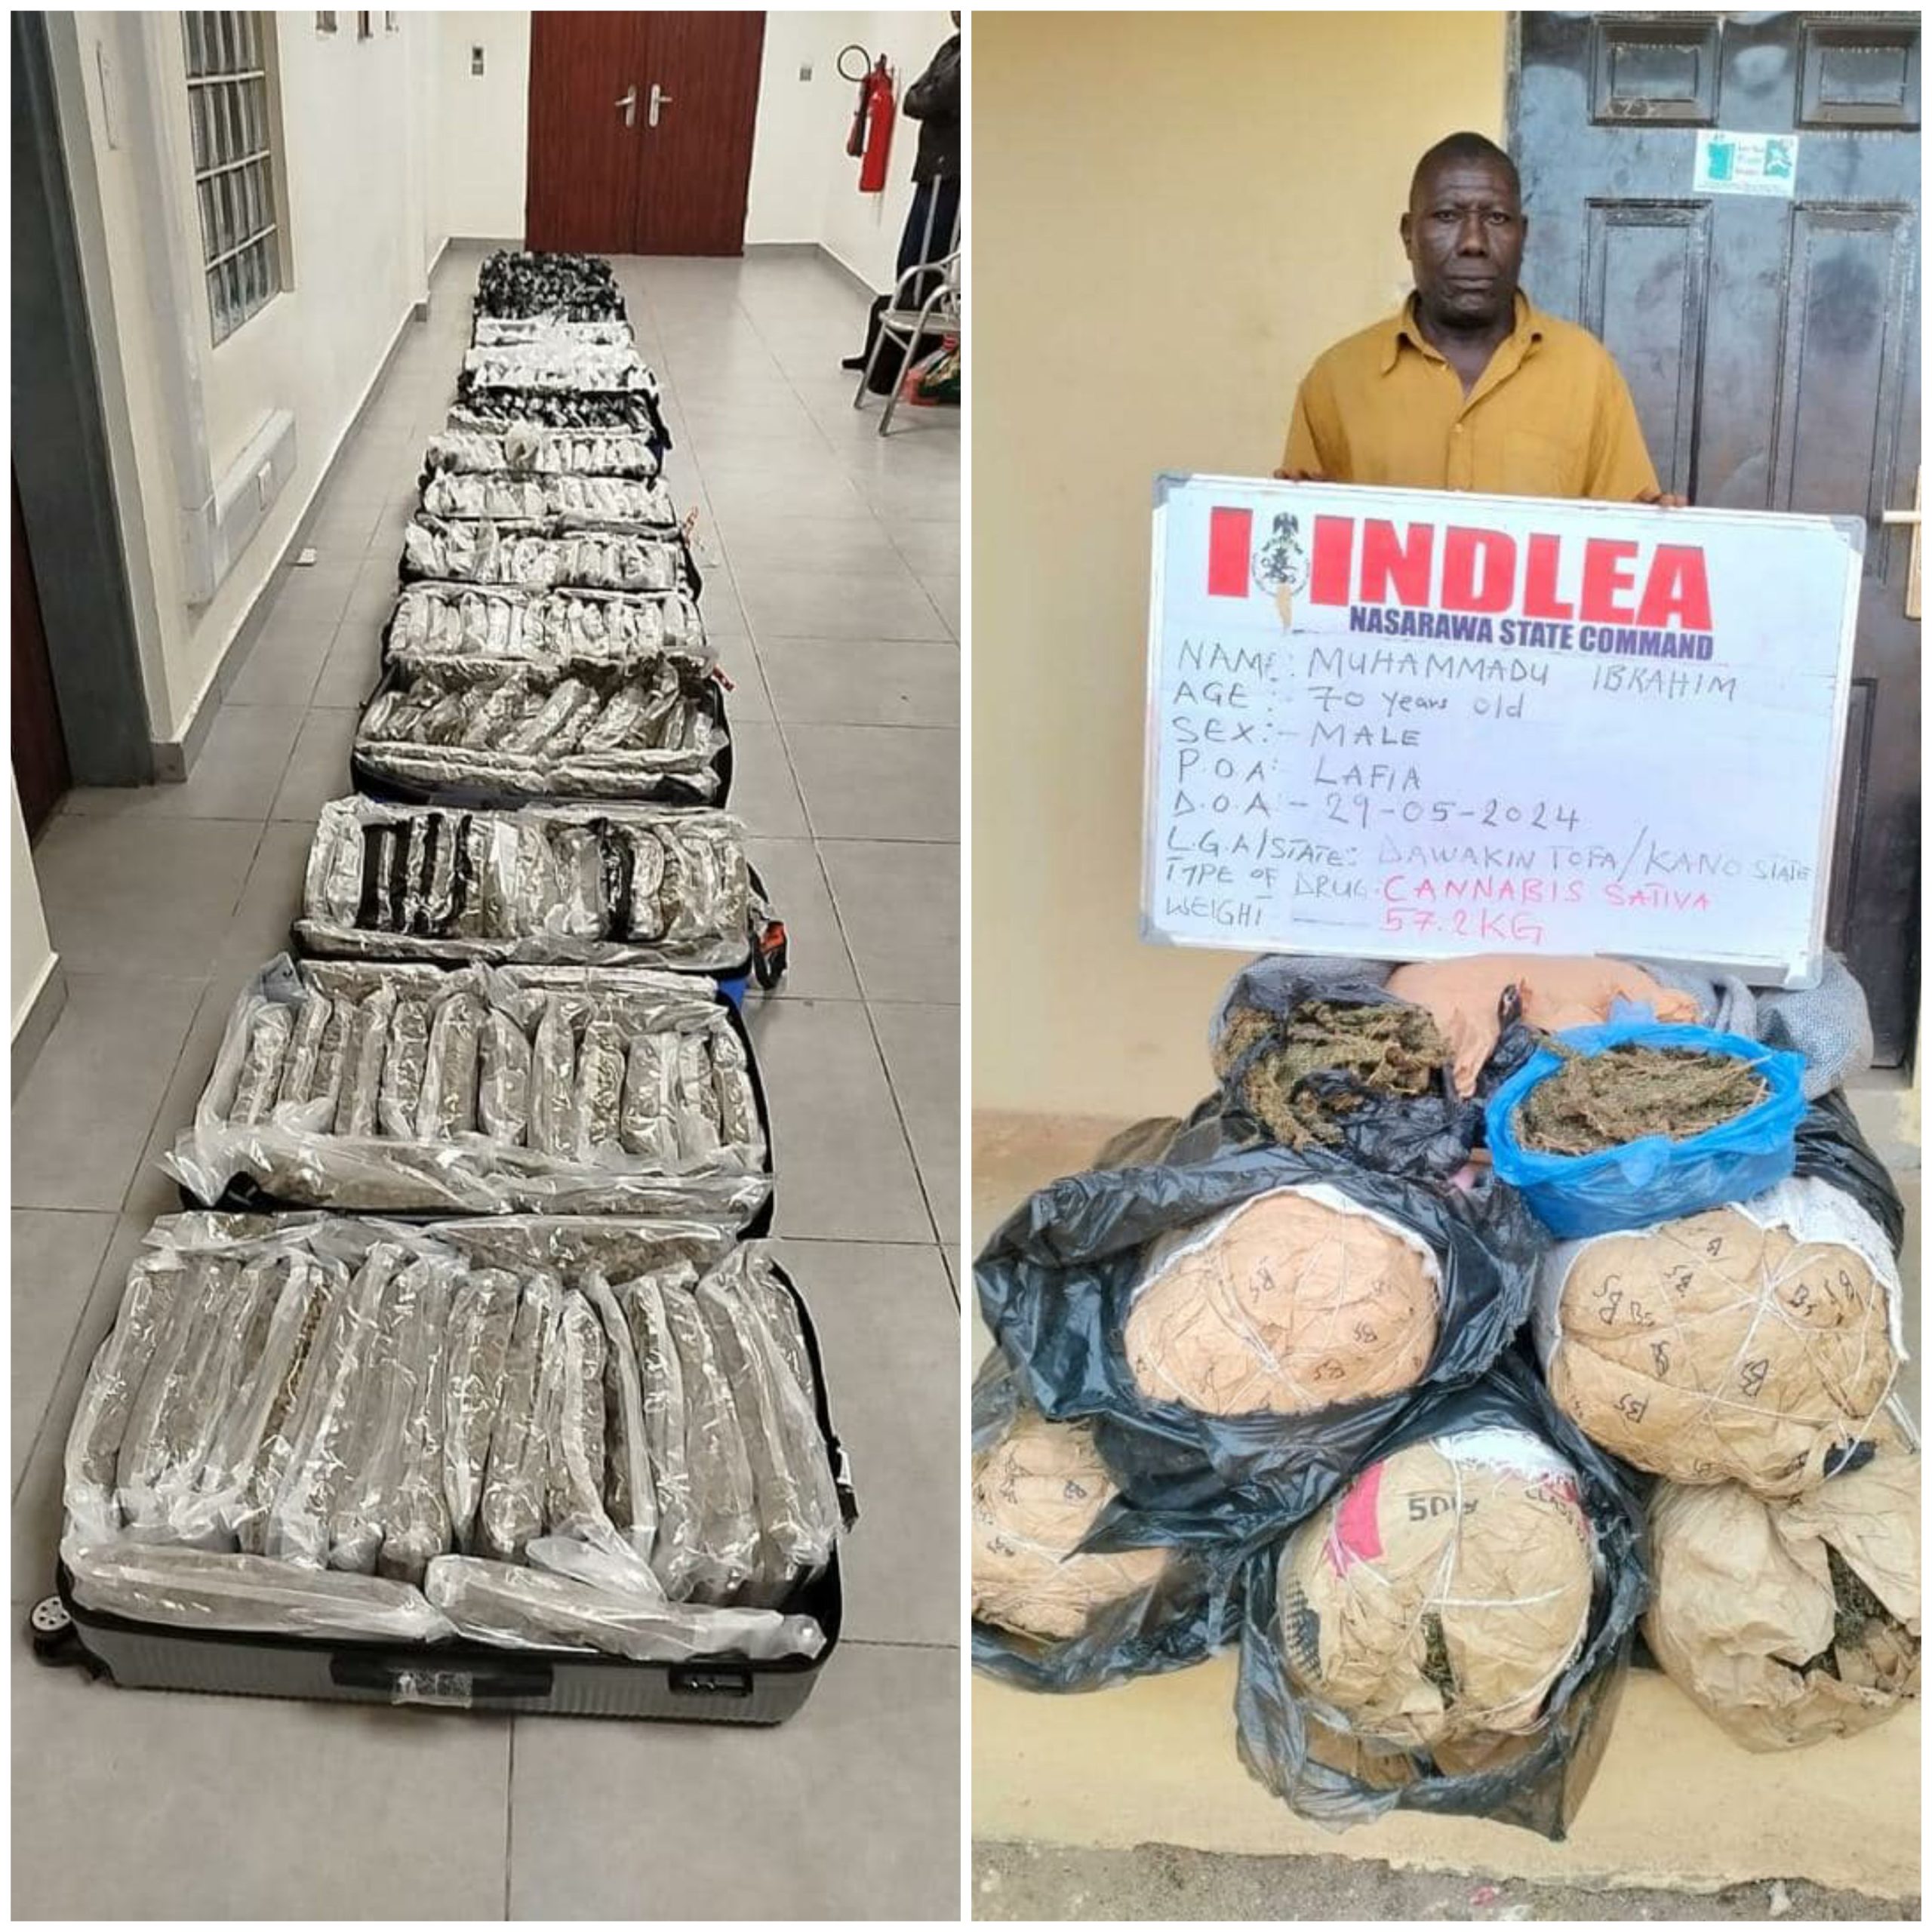 NDLEA Intercepts N2.1bn Codeine, Loud Consignments, Arrests 70-Year-Old Grandpa, Others (Pictures)